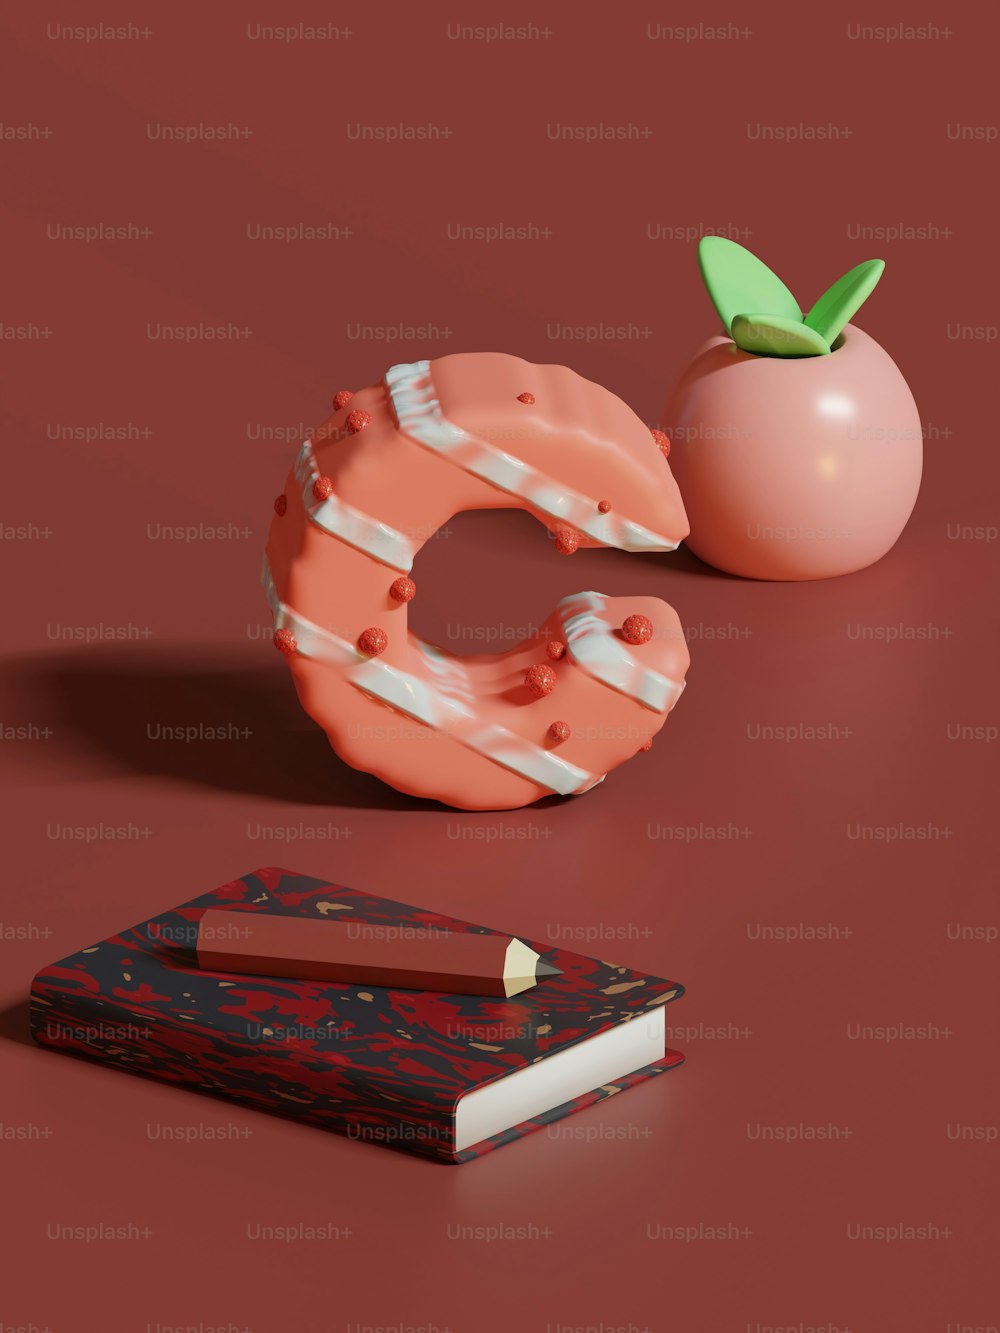 a book and a piece of fruit on a table